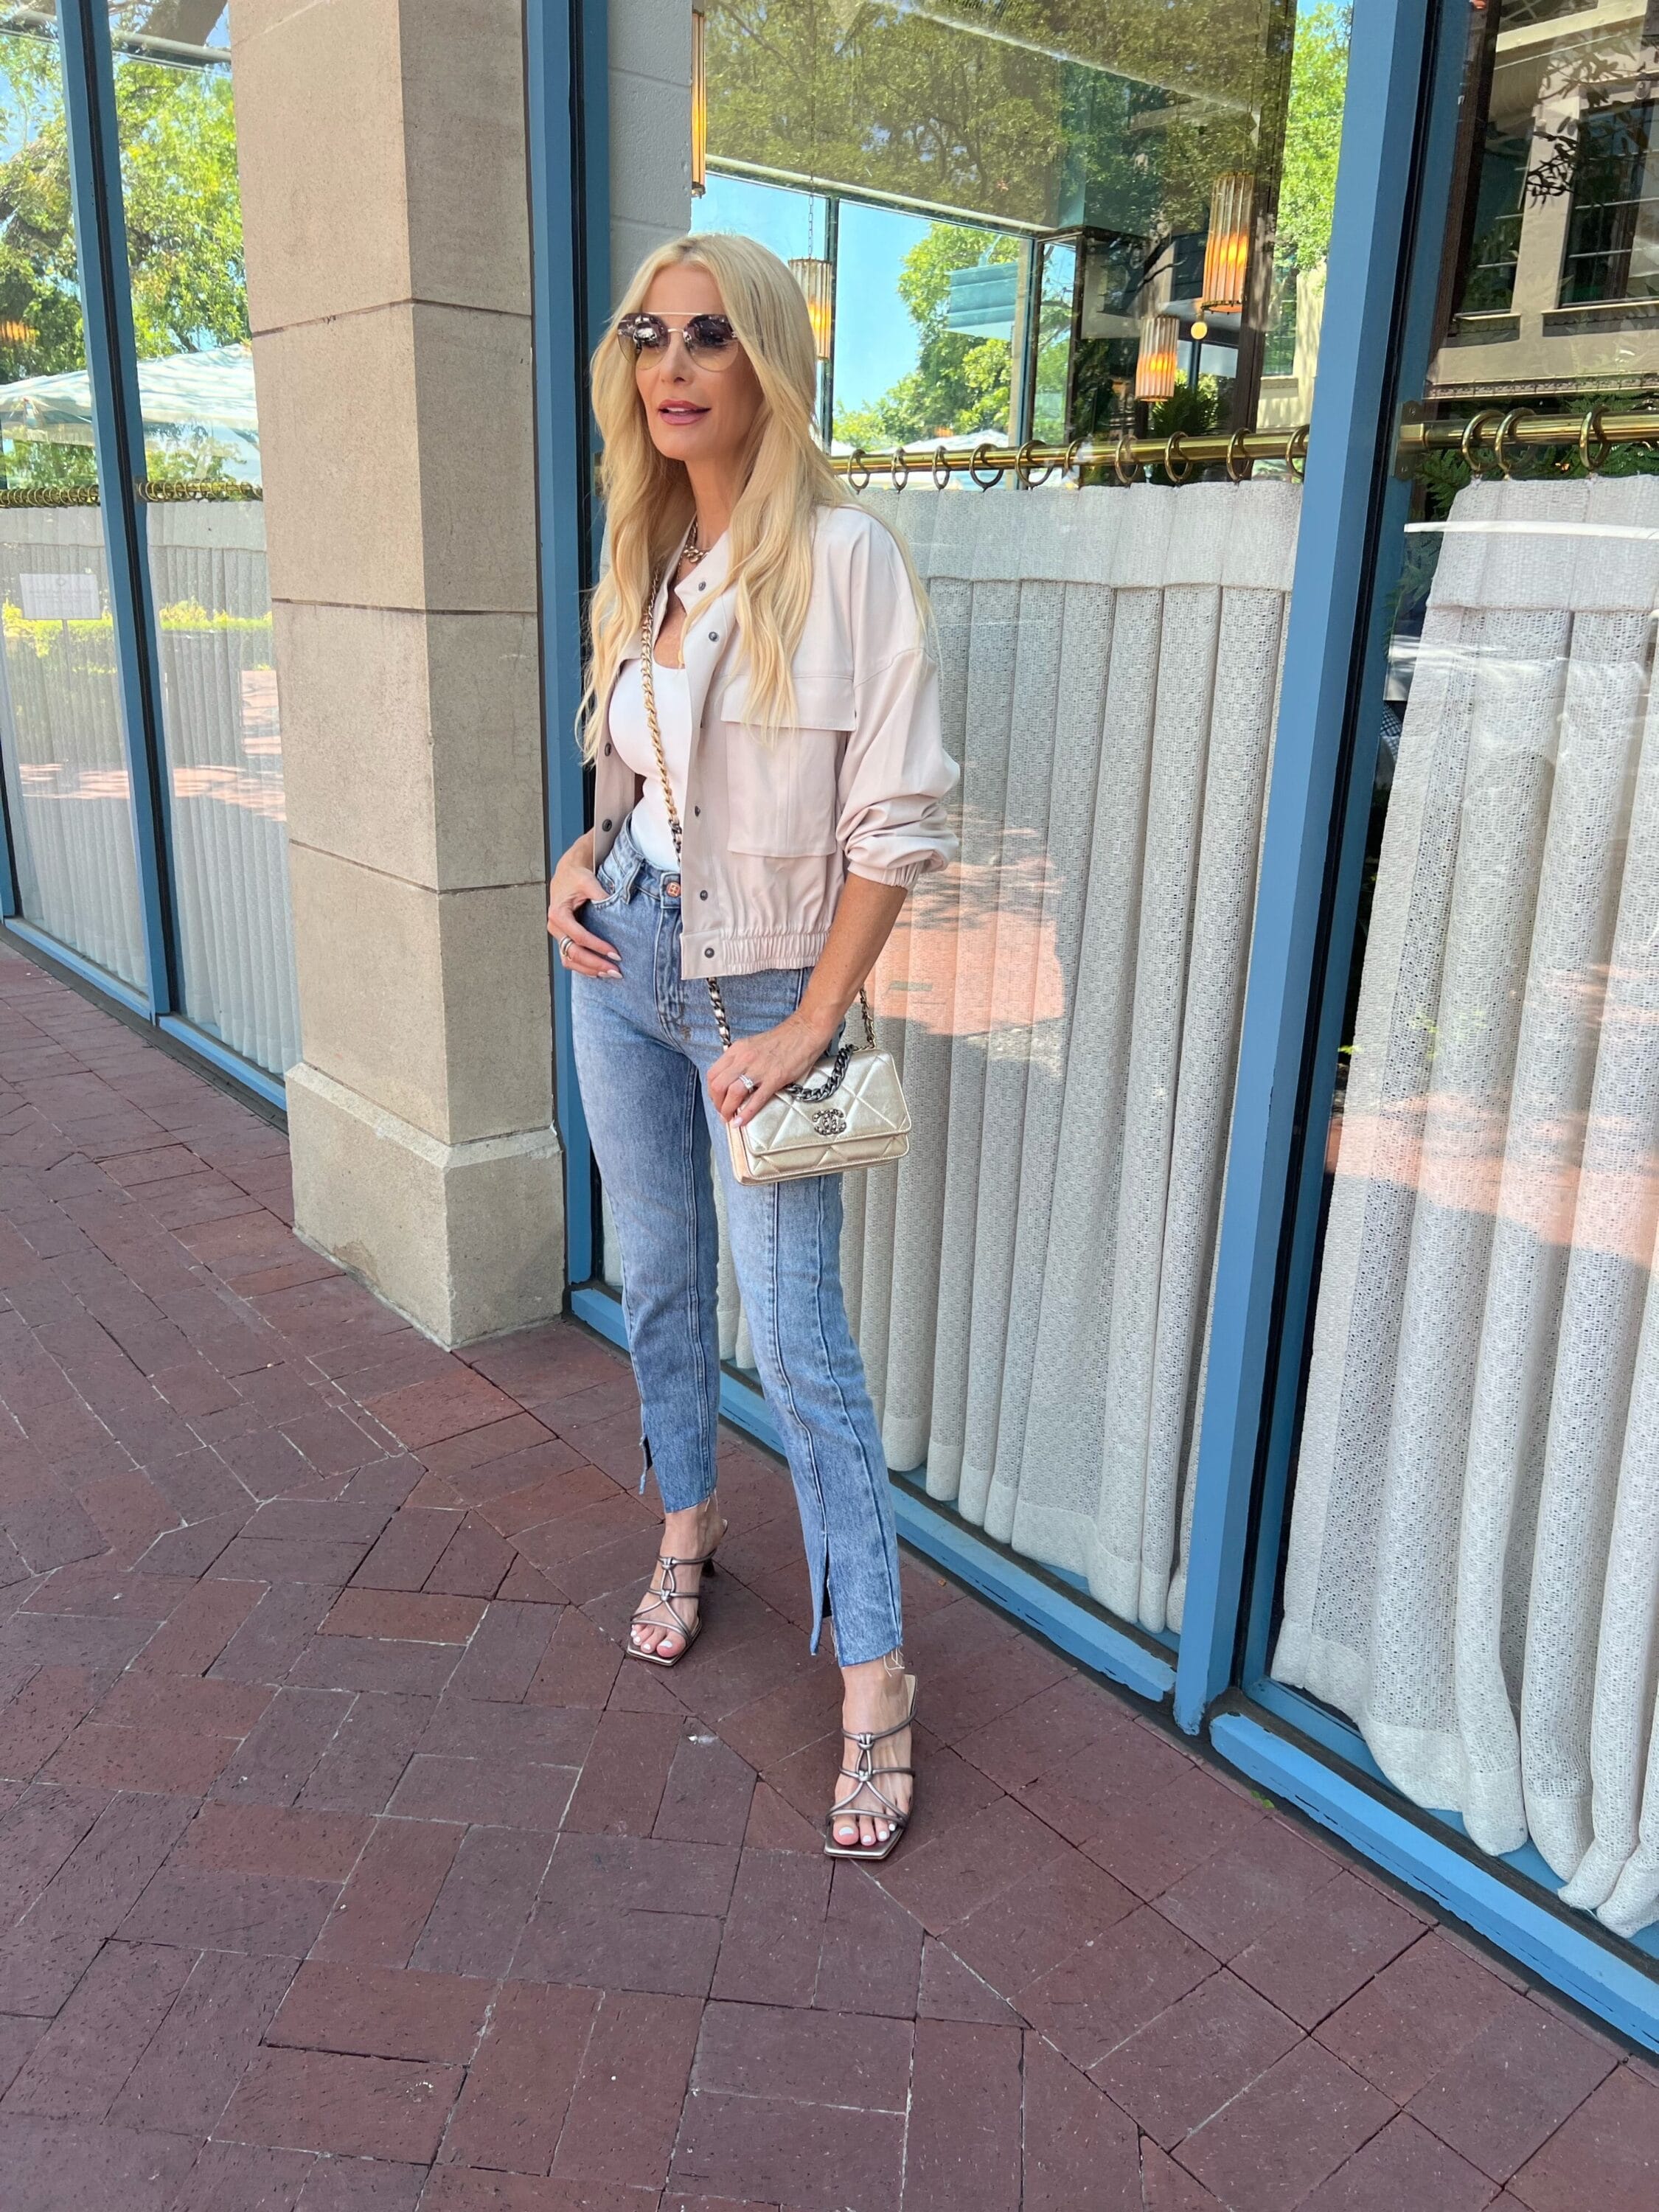 Dallas fashion blogger wearing light jacket as key transitional piece from summer to to fall